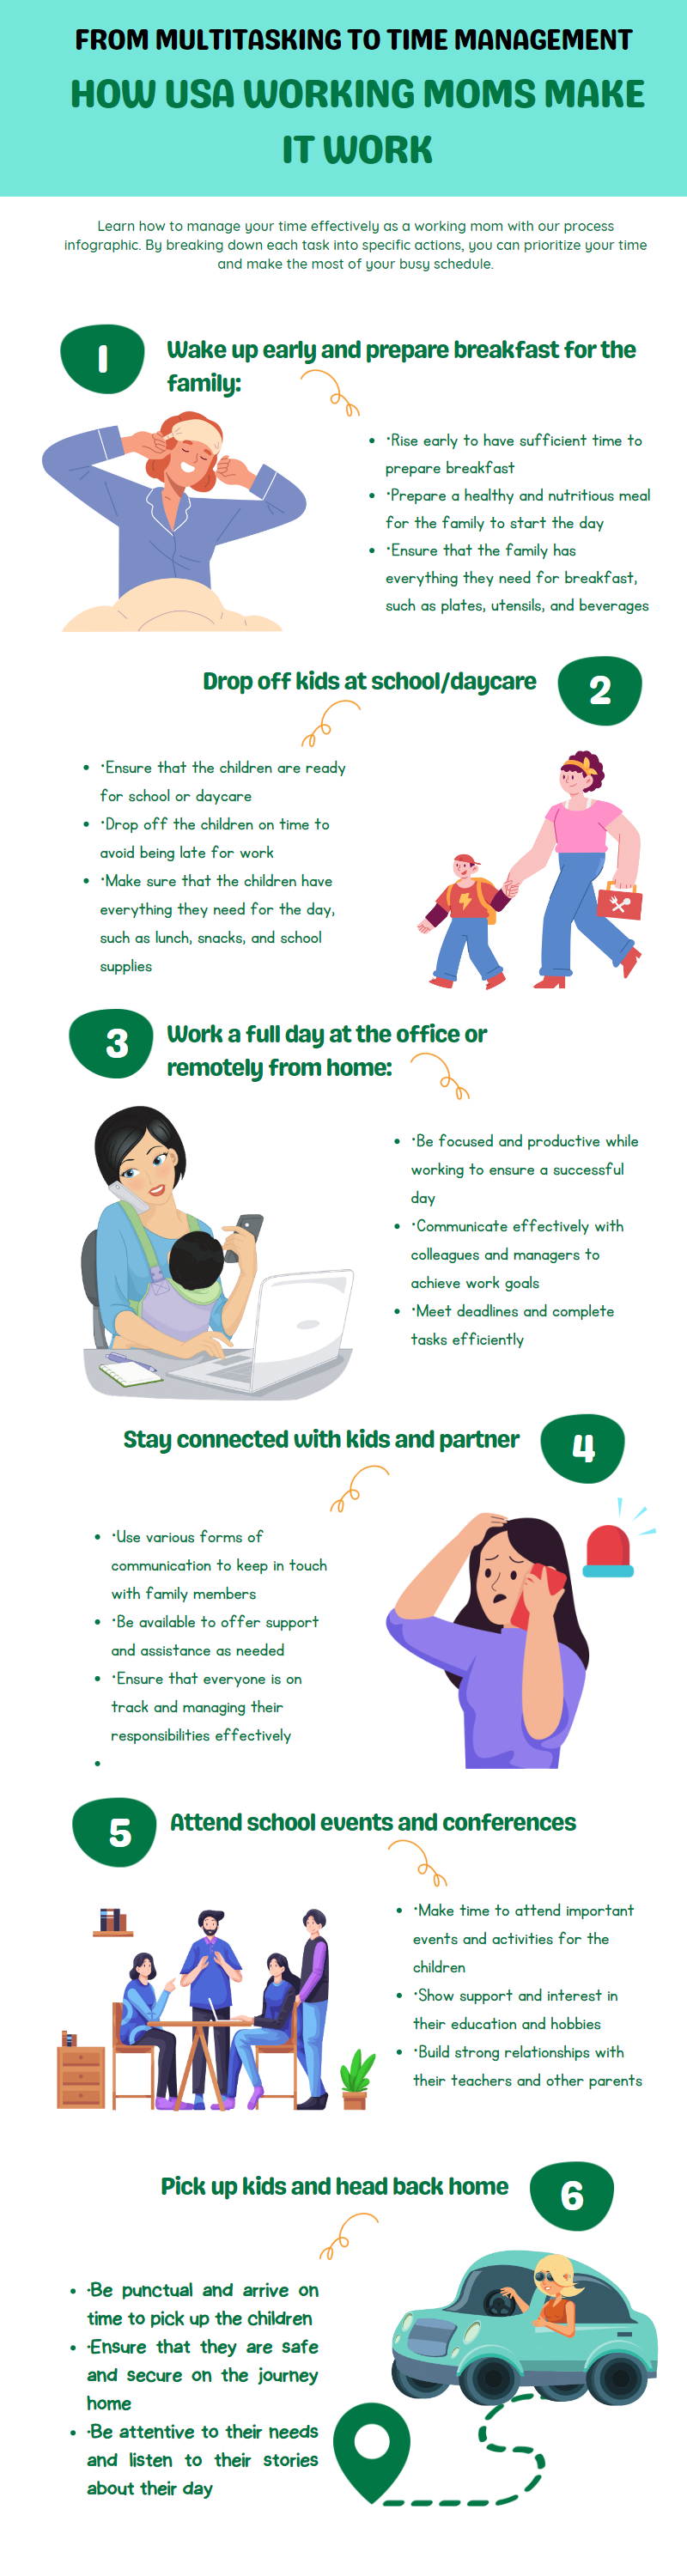 Process infographic illustrating the steps involved in balancing work and home responsibilities for working moms. By breaking down each task into specific actions, the infographic can help prioritize time and manage a busy schedule effectively.